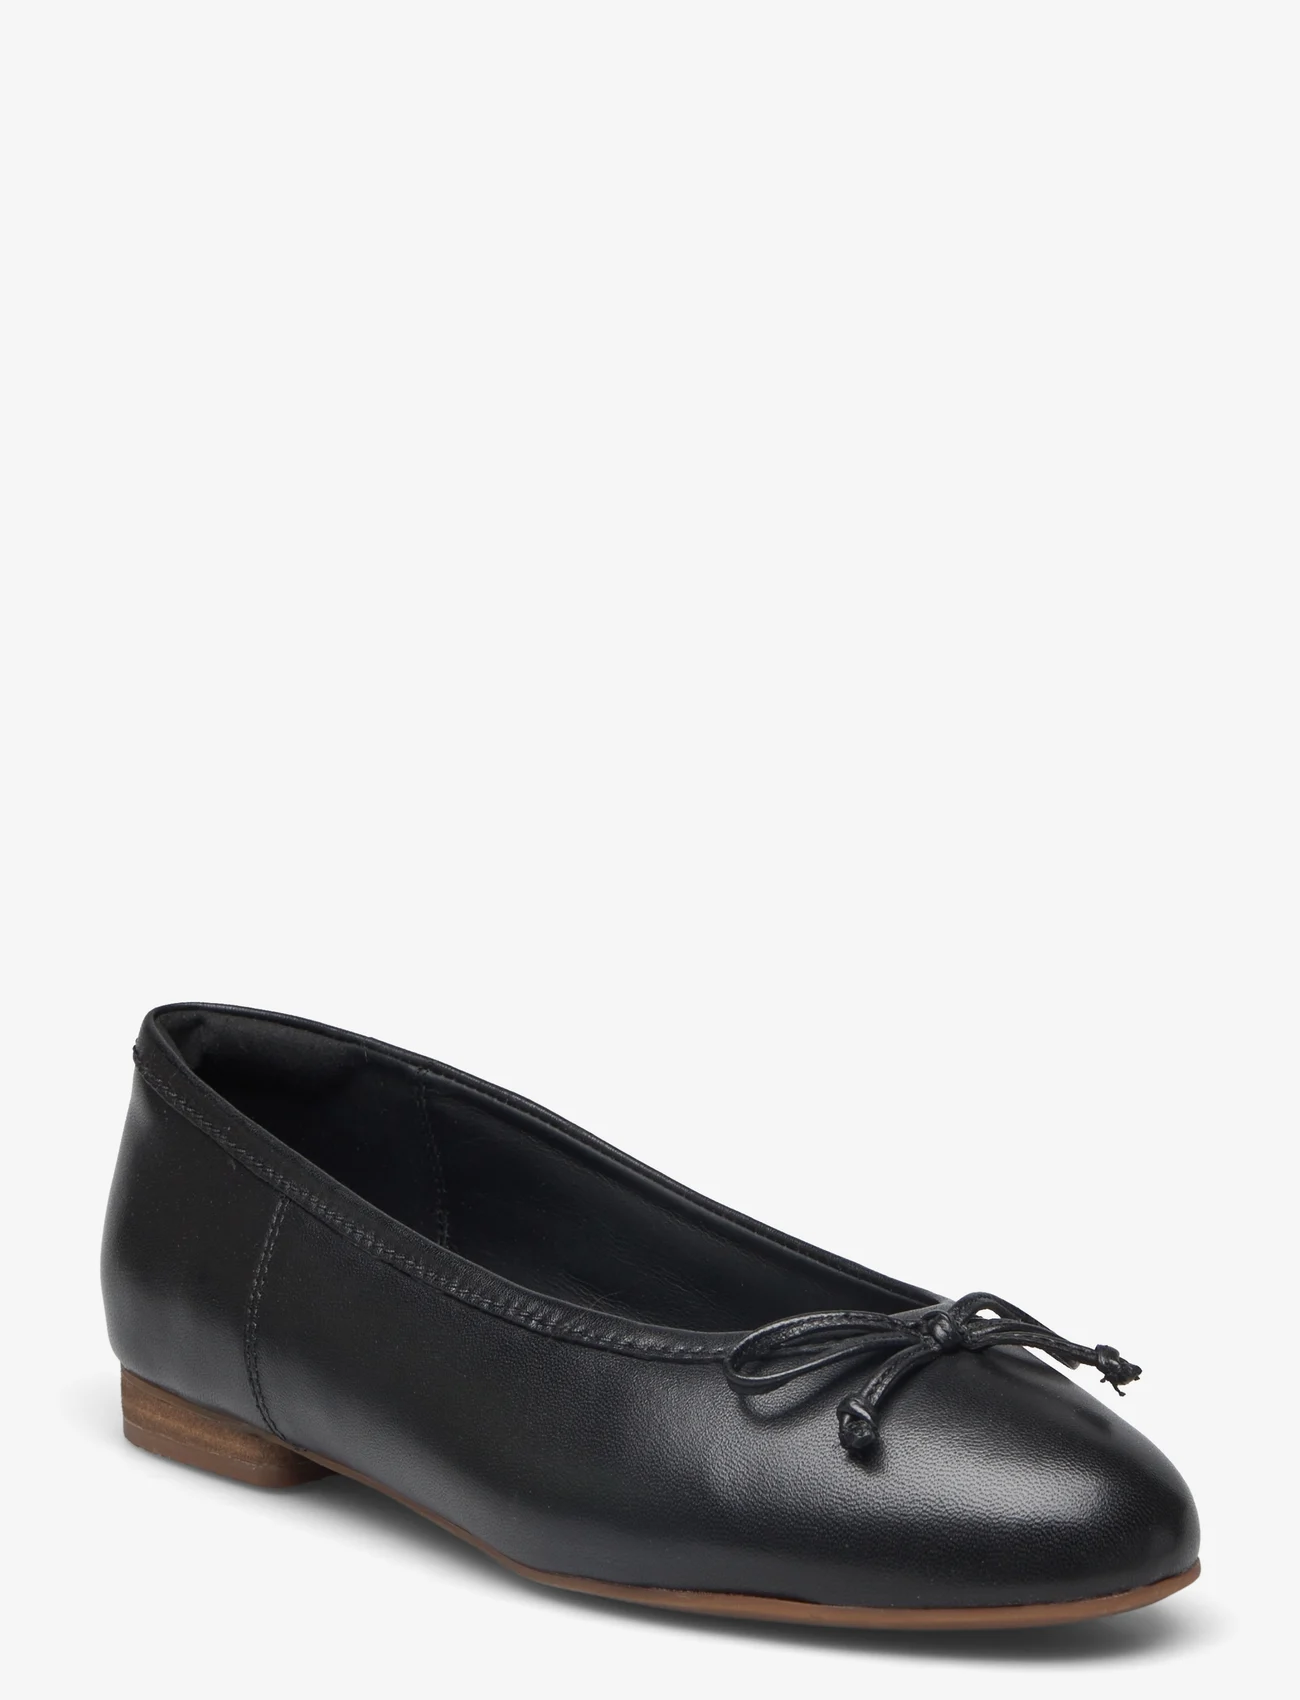 Clarks - Fawna Lily D - peoriided outlet-hindadega - 1216 black leather - 0